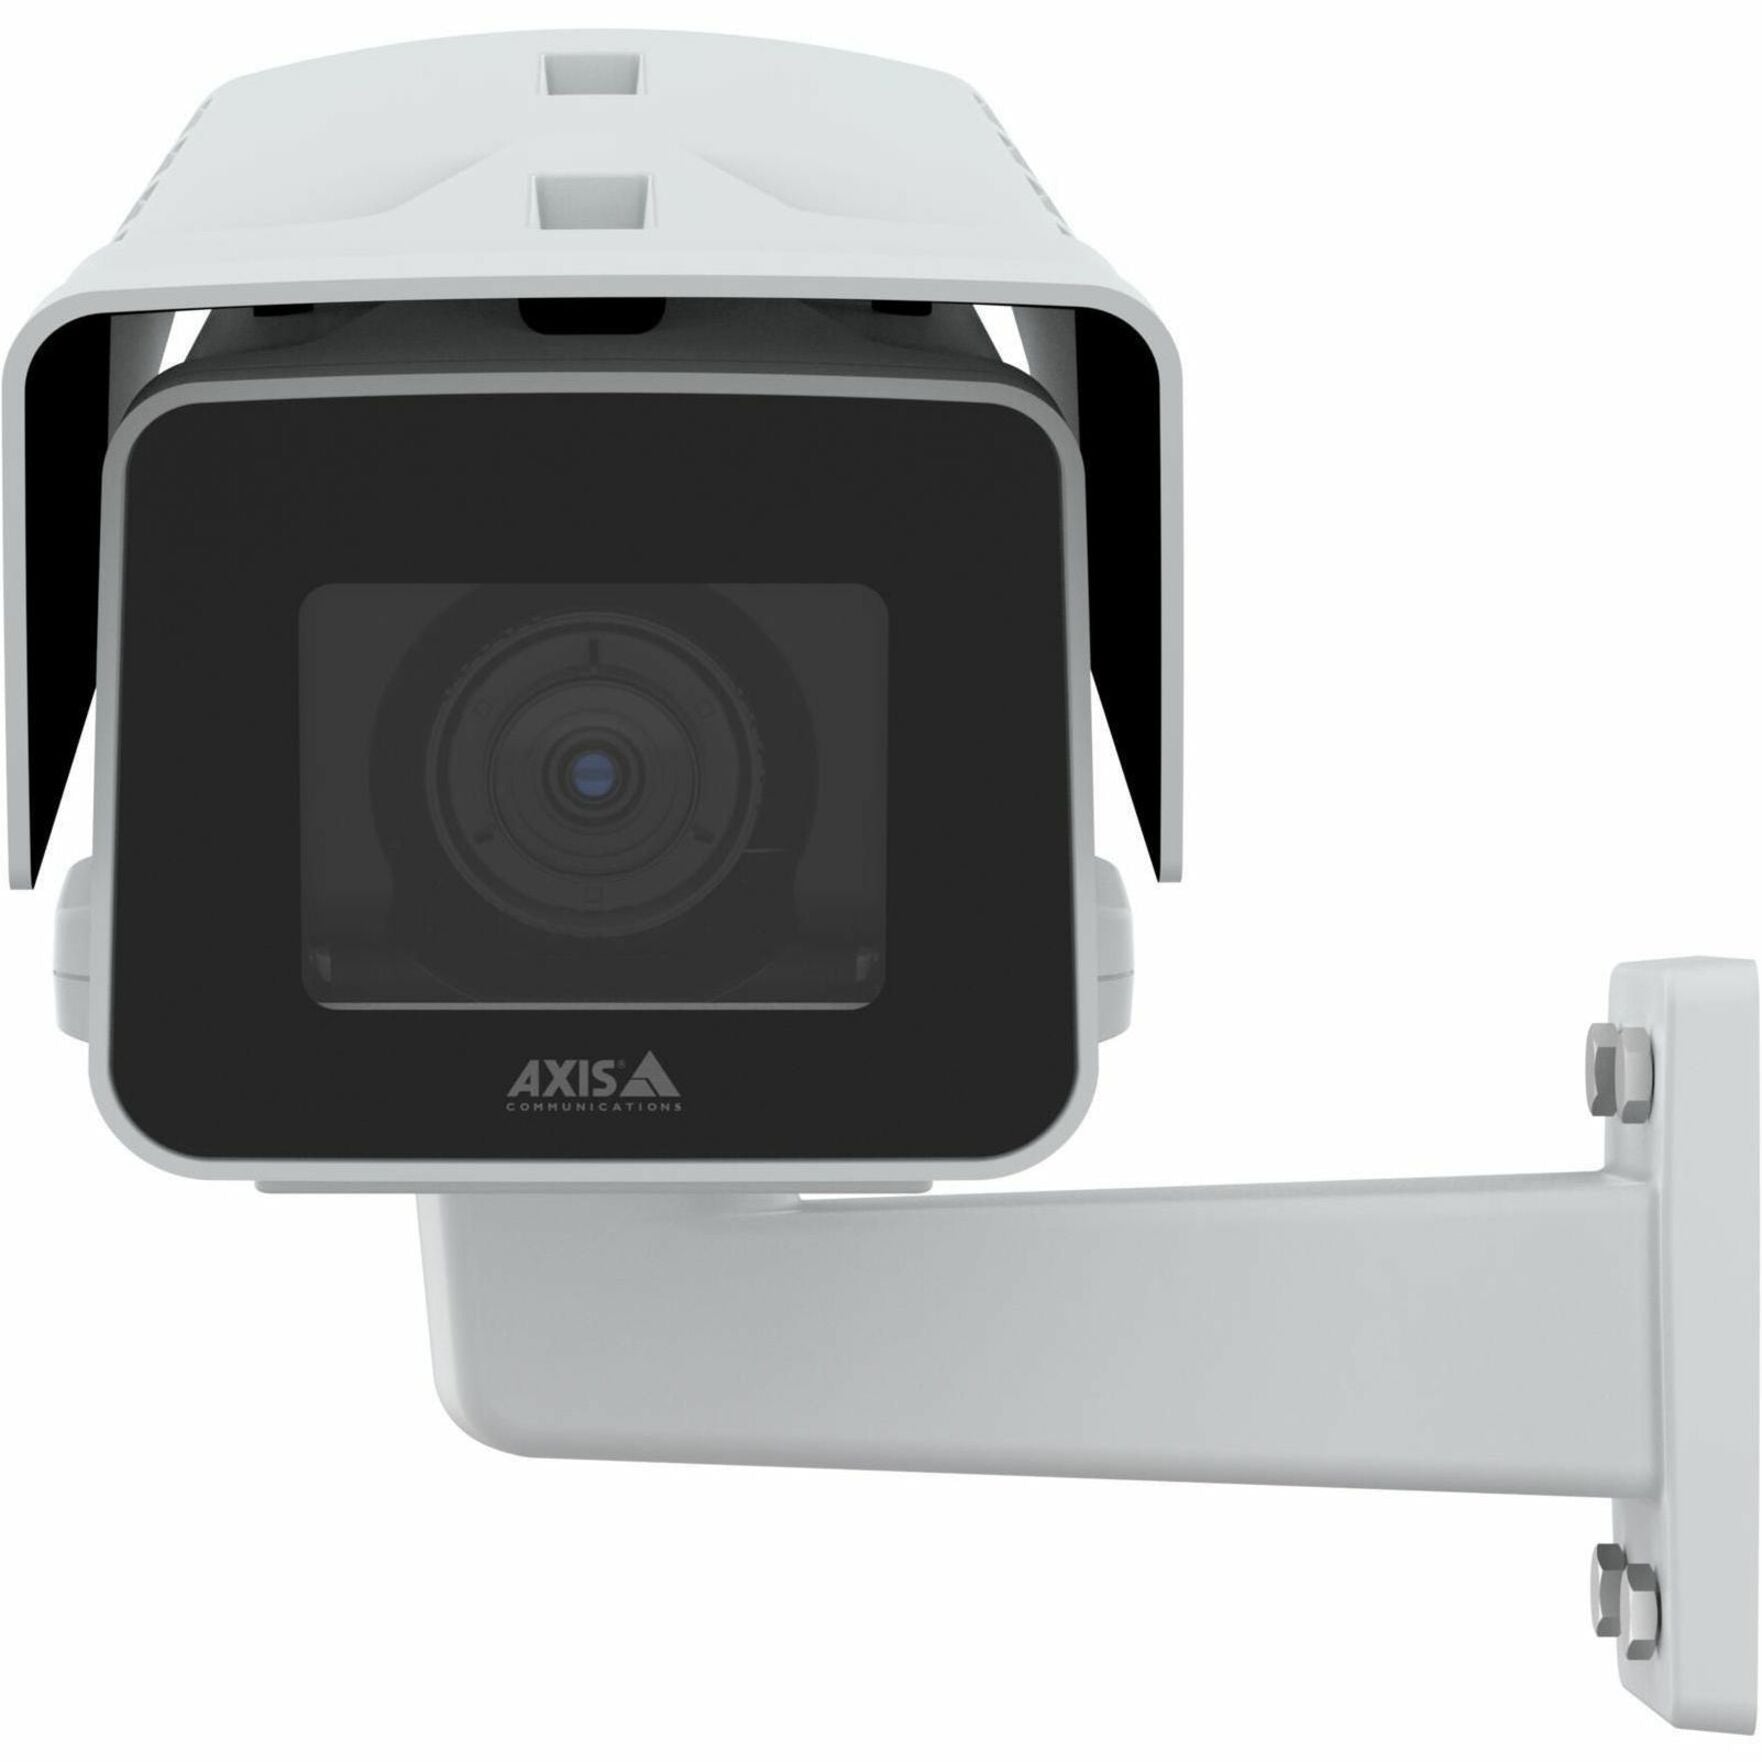 AXIS P1385-E 2 Megapixel Outdoor Full HD Network Camera - Color - Box - White - TAA Compliant (02734-001)